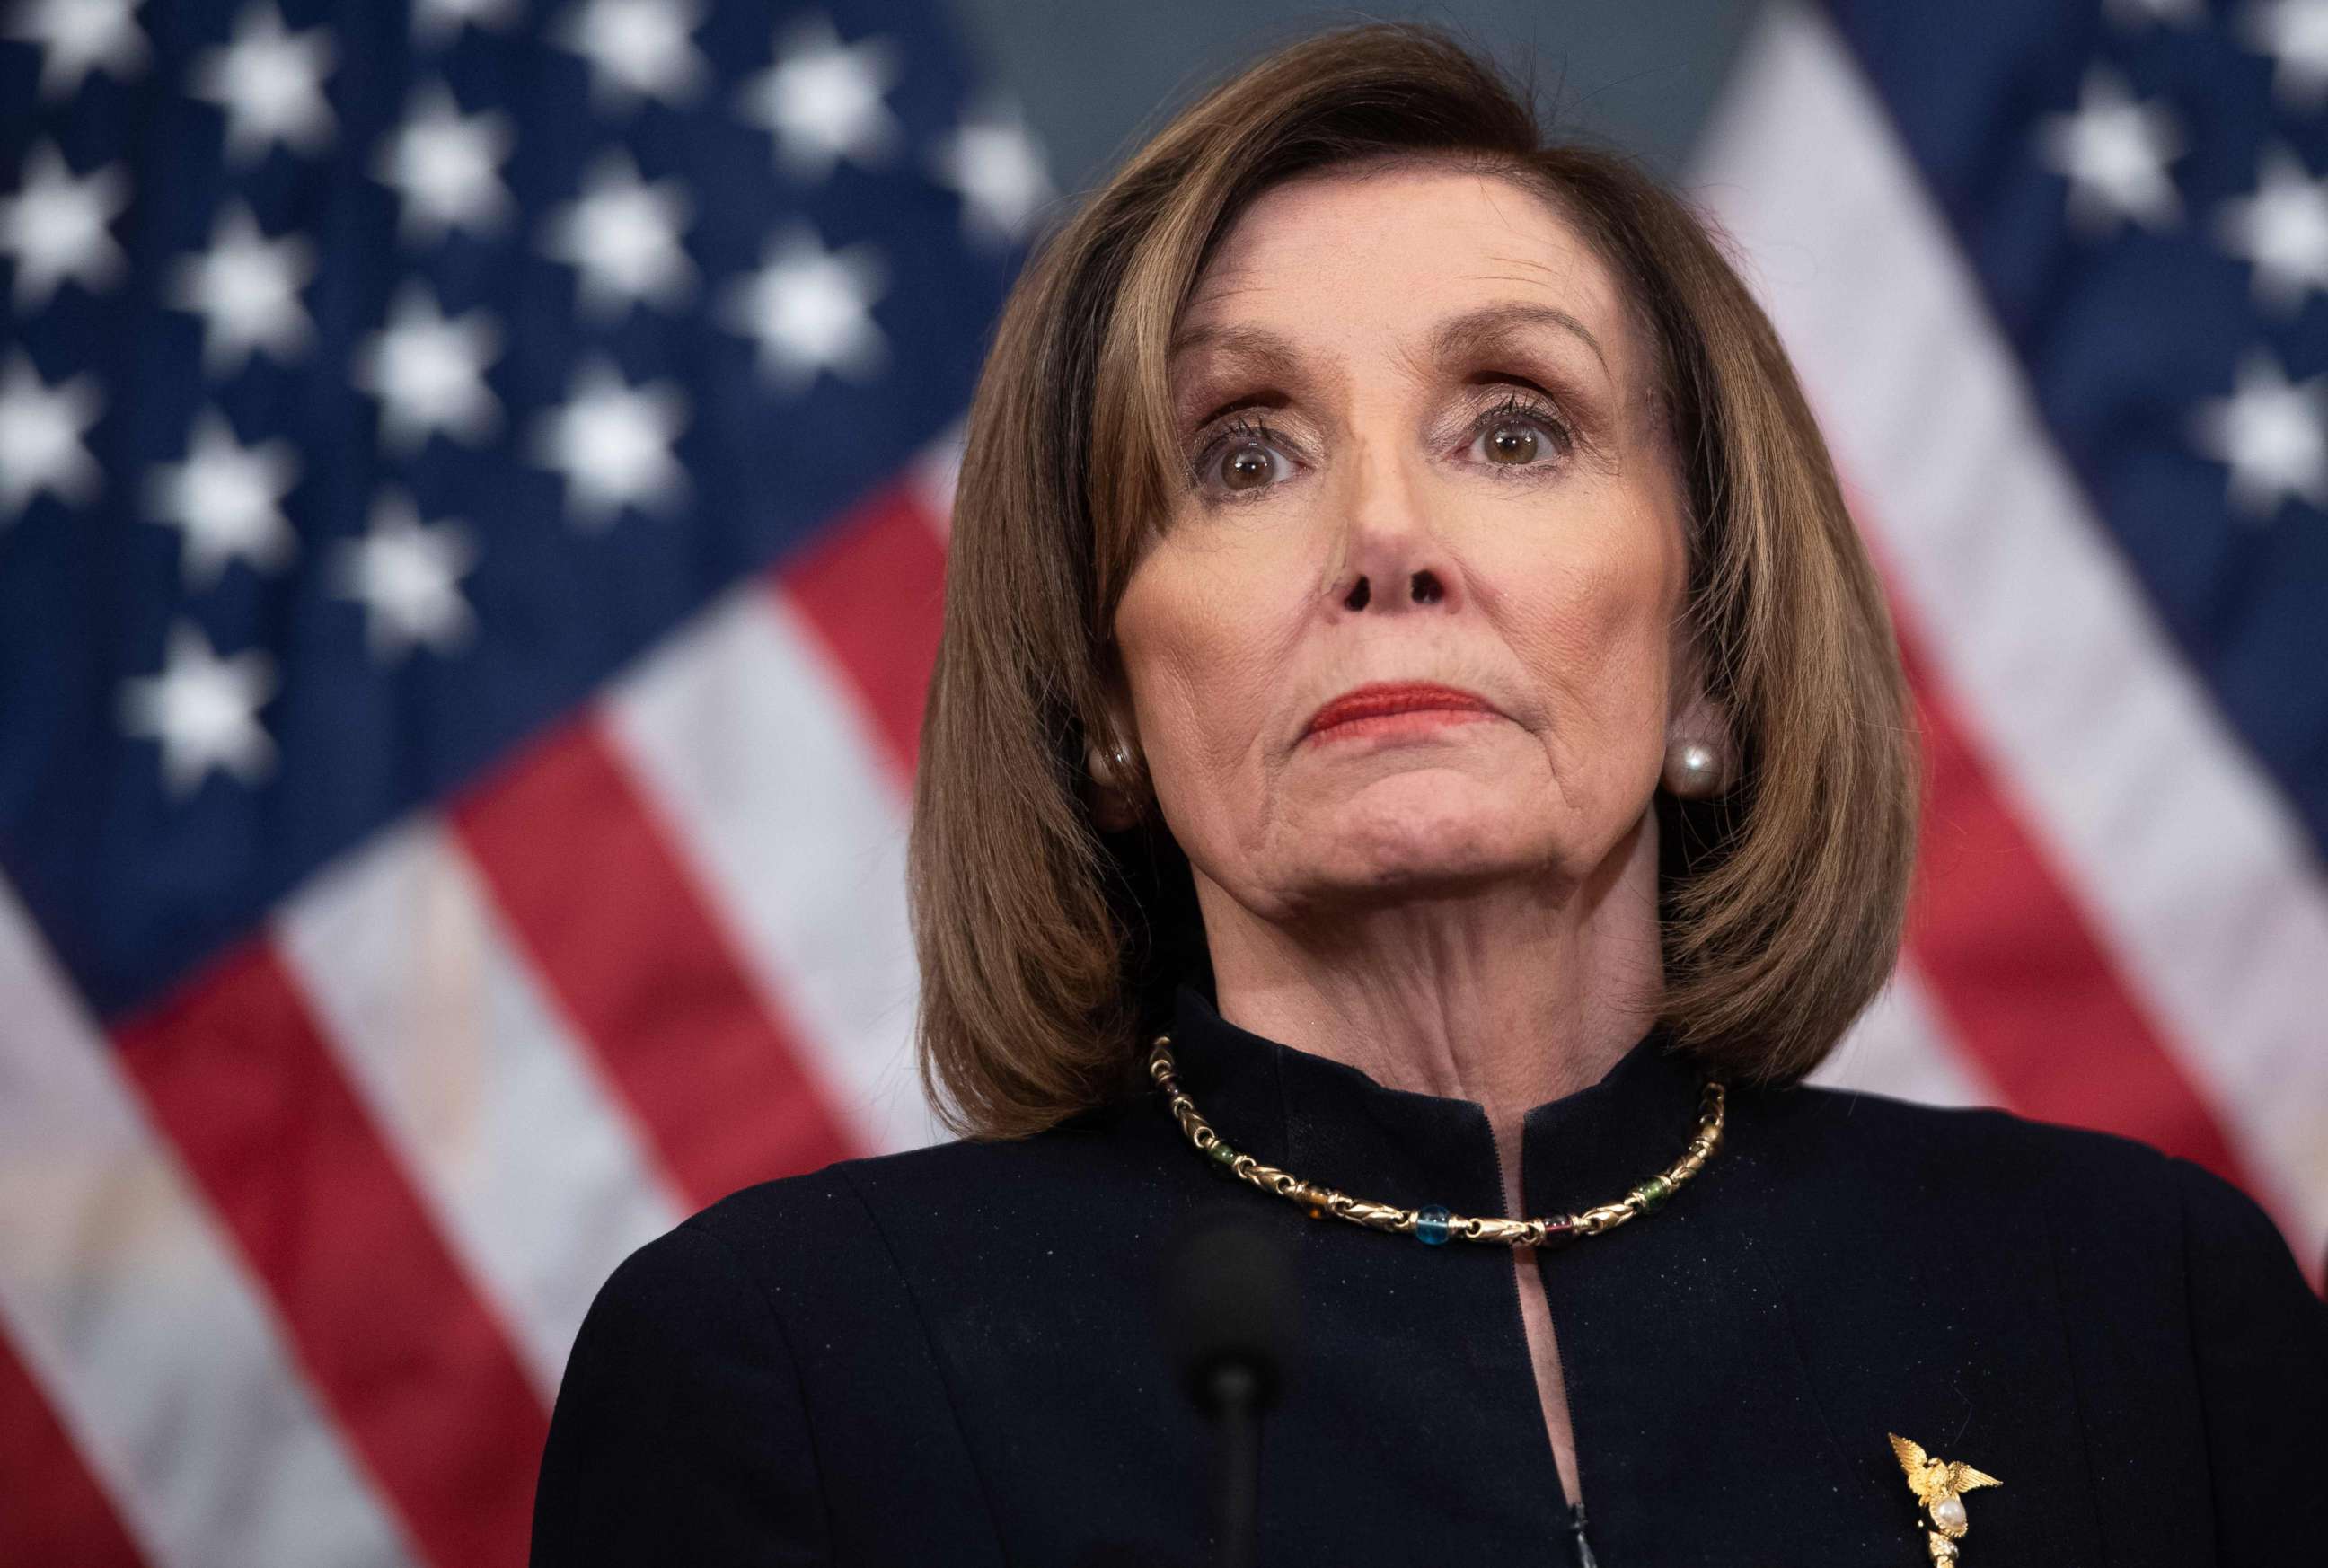 PHOTO: In this file photo taken on Dec. 18, 2019, Speaker of the House Nancy Pelosi holds a press conference after the House passed articles of impeachment against President Donald Trump, at the U.S. Capitol in Washington, D.C.